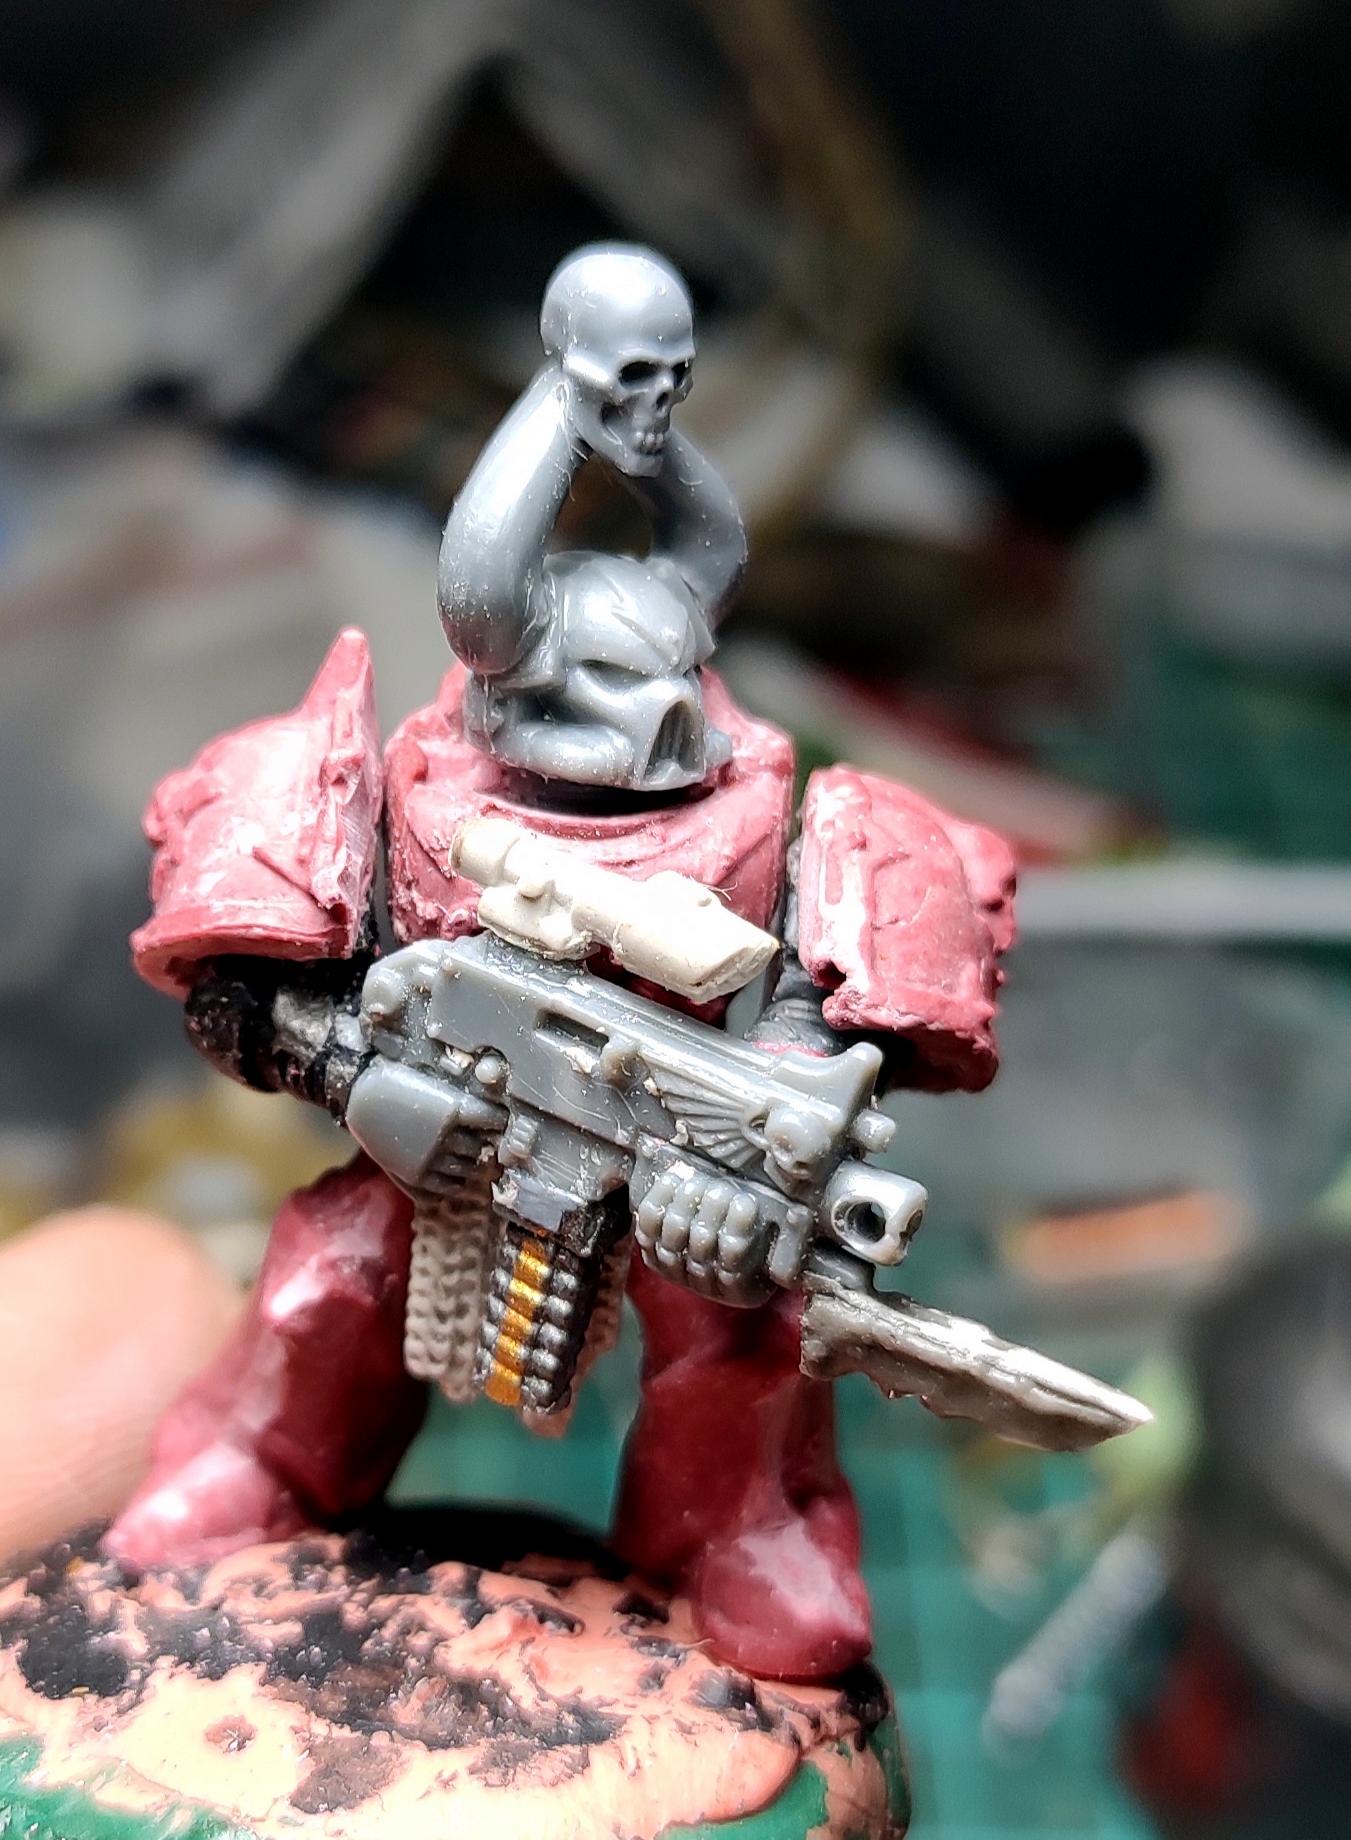 Bayonet, Bolter, Casting, Chaos, Chaos Space Marines, Conversion, Heresy, Heretic Astartes, Infantry, Kitbash, Putty, Scope, Traitor Legions, Warhammer 40,000, Work In Progress